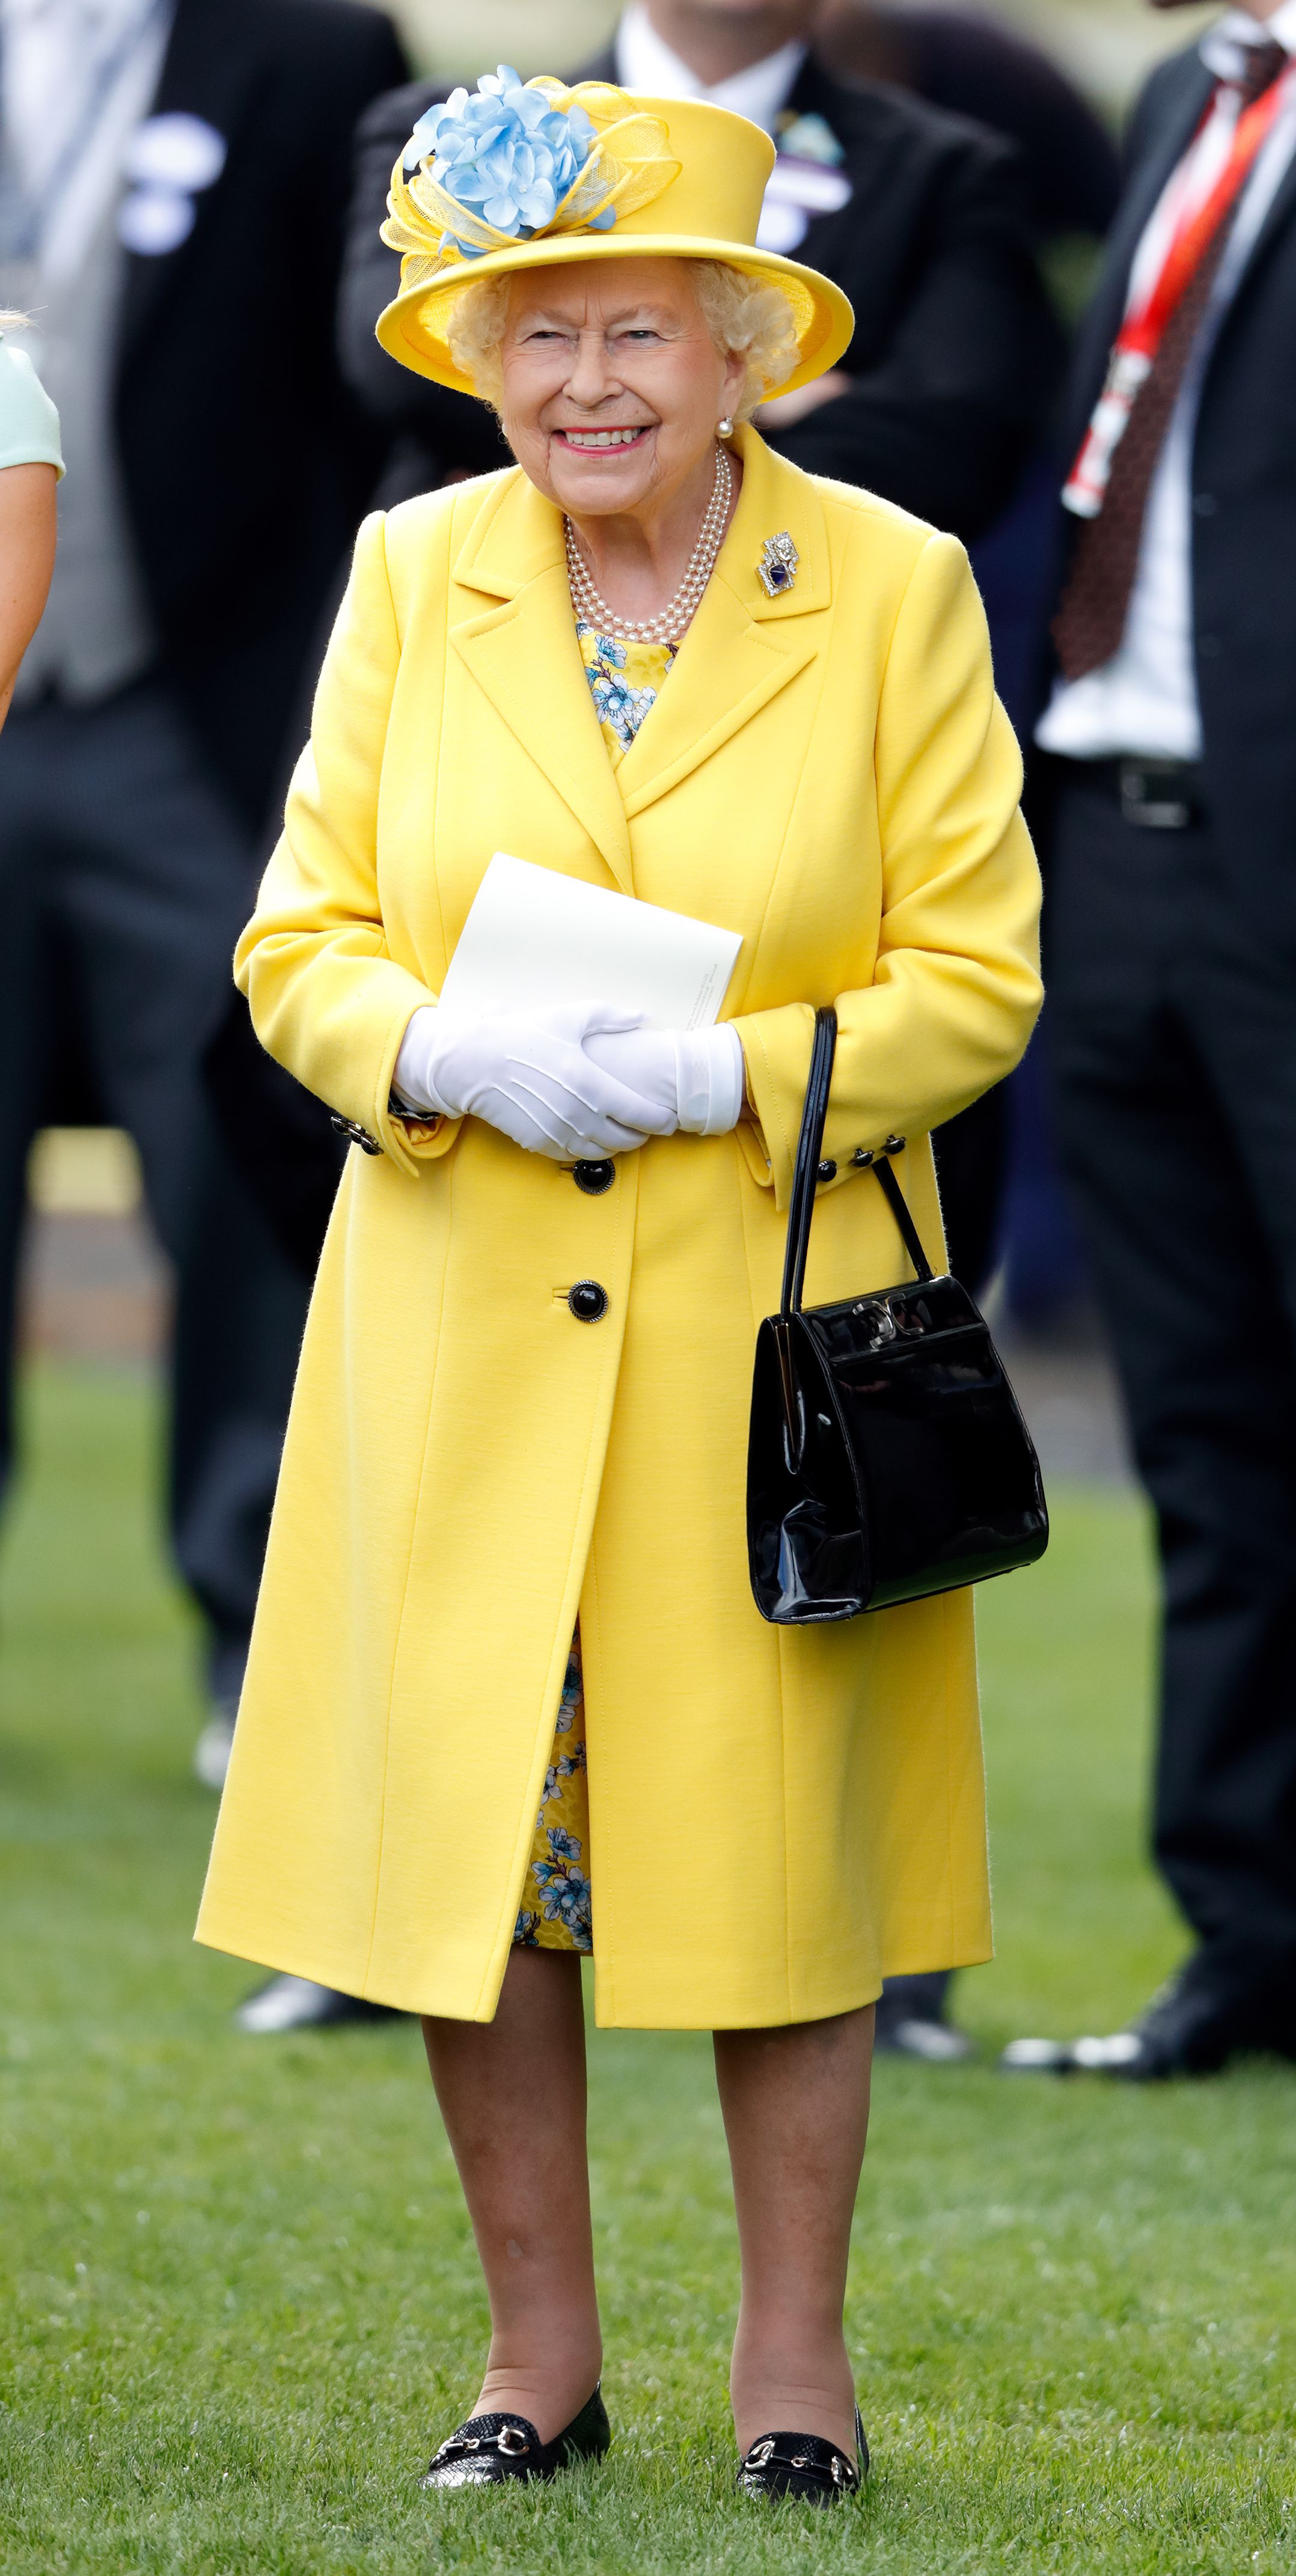 Fashion Rules and Style Protocol the Royal Family Must Follow